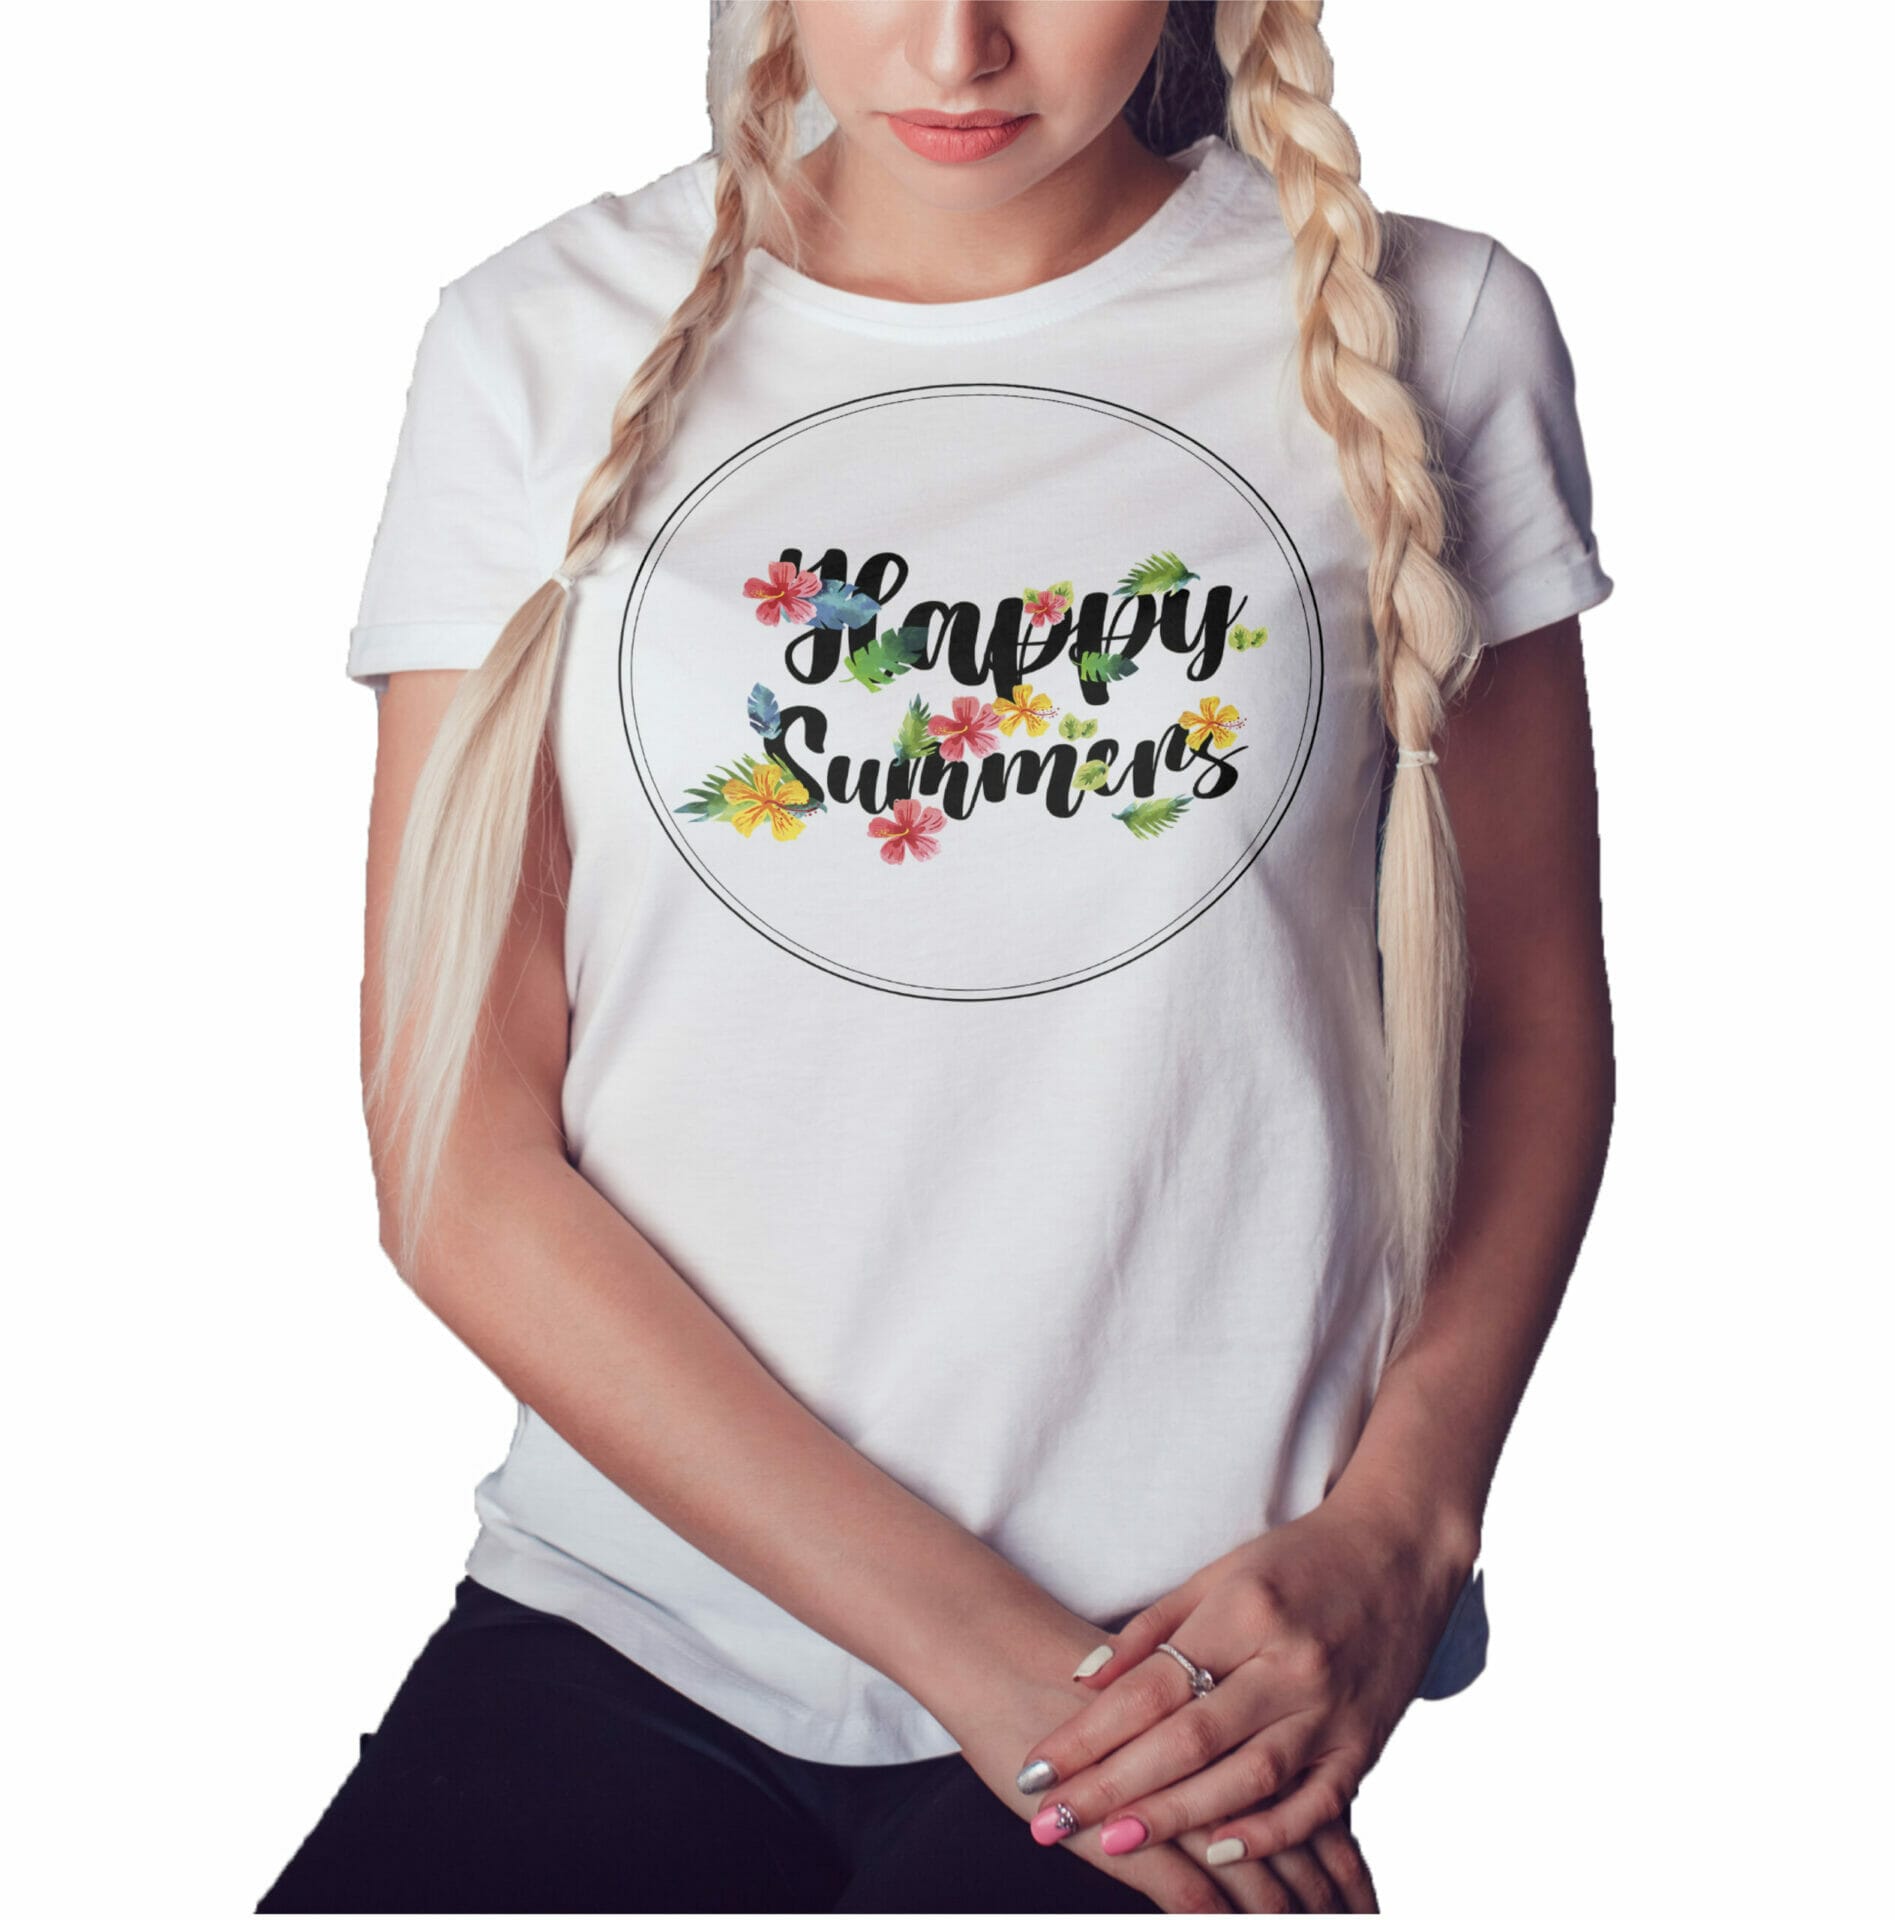 Happy Summers T-shirt Design For Girls